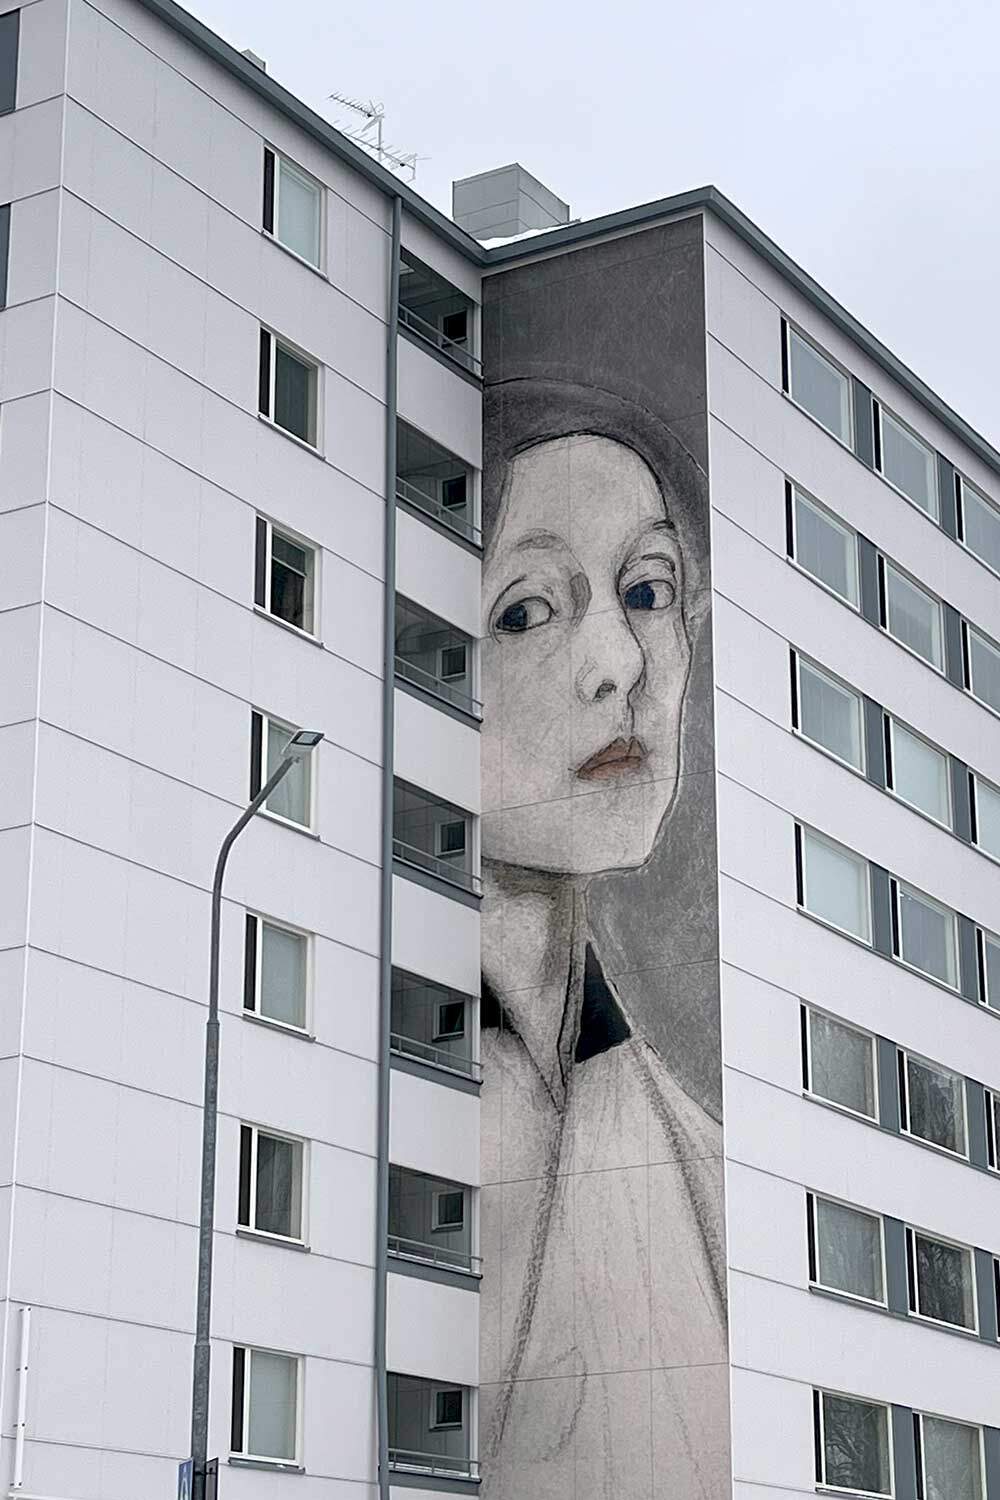 Steni Vision Custom Panels. Image of the artist who once lived in the building